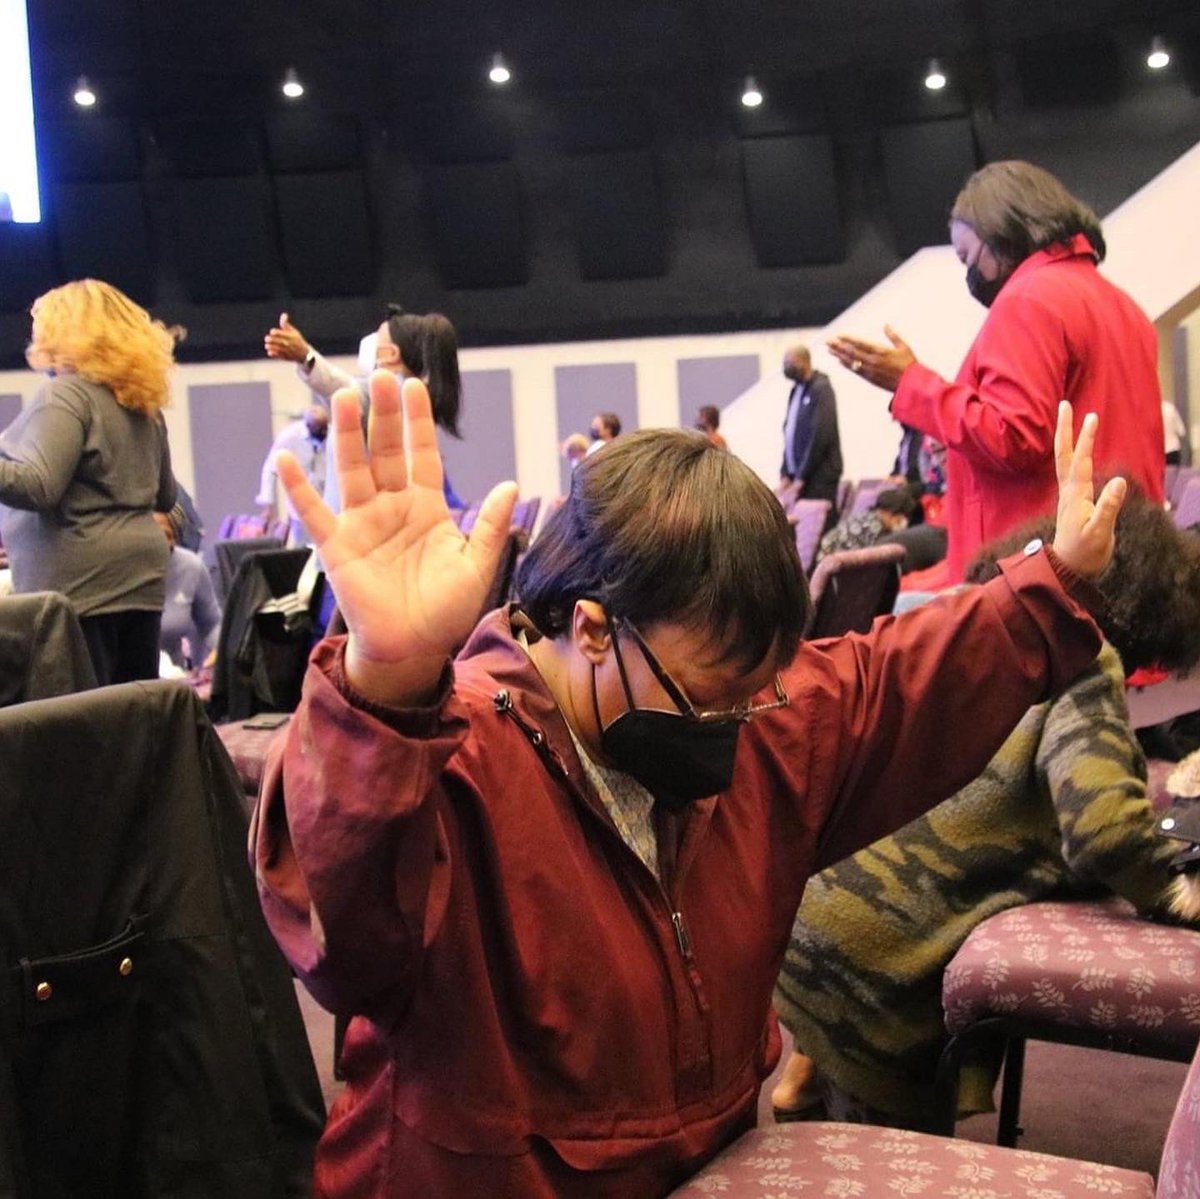 We invited God in the room and He threw His weight around tonight! Tonight was an ocular demonstration that when we invite God in the room, AMAZING things happen!
#ANightOfPrayer!
#WePrayAtTheShip
#MiraclesSignsAndWonders 
#ThankYouLord